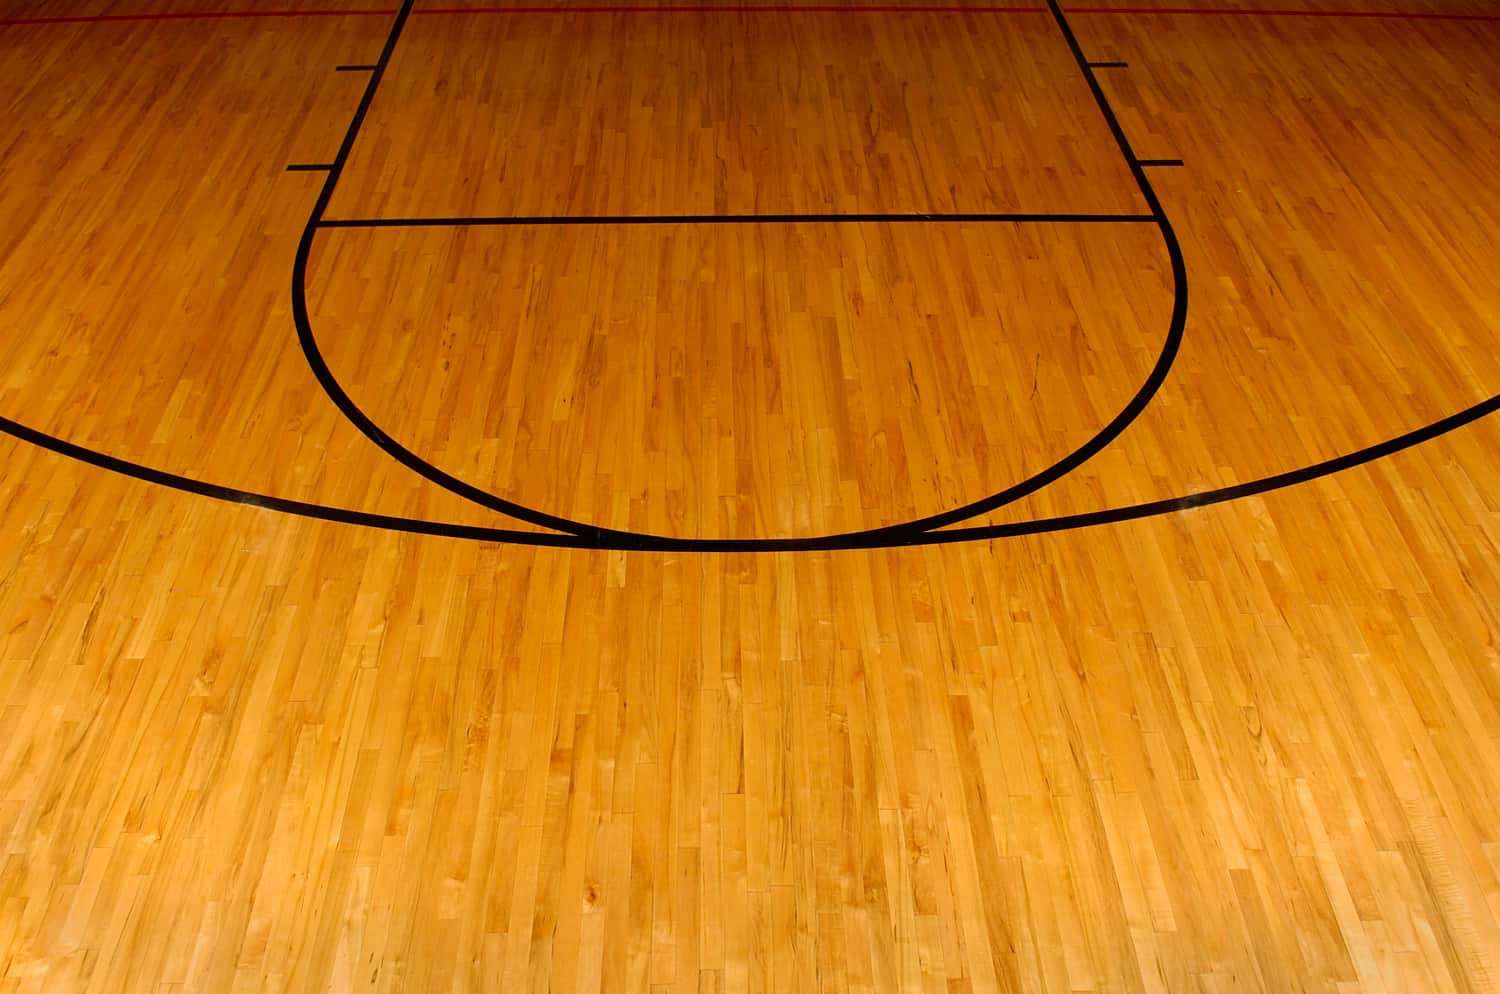 Wooden basketball floor with the foul and three point line.